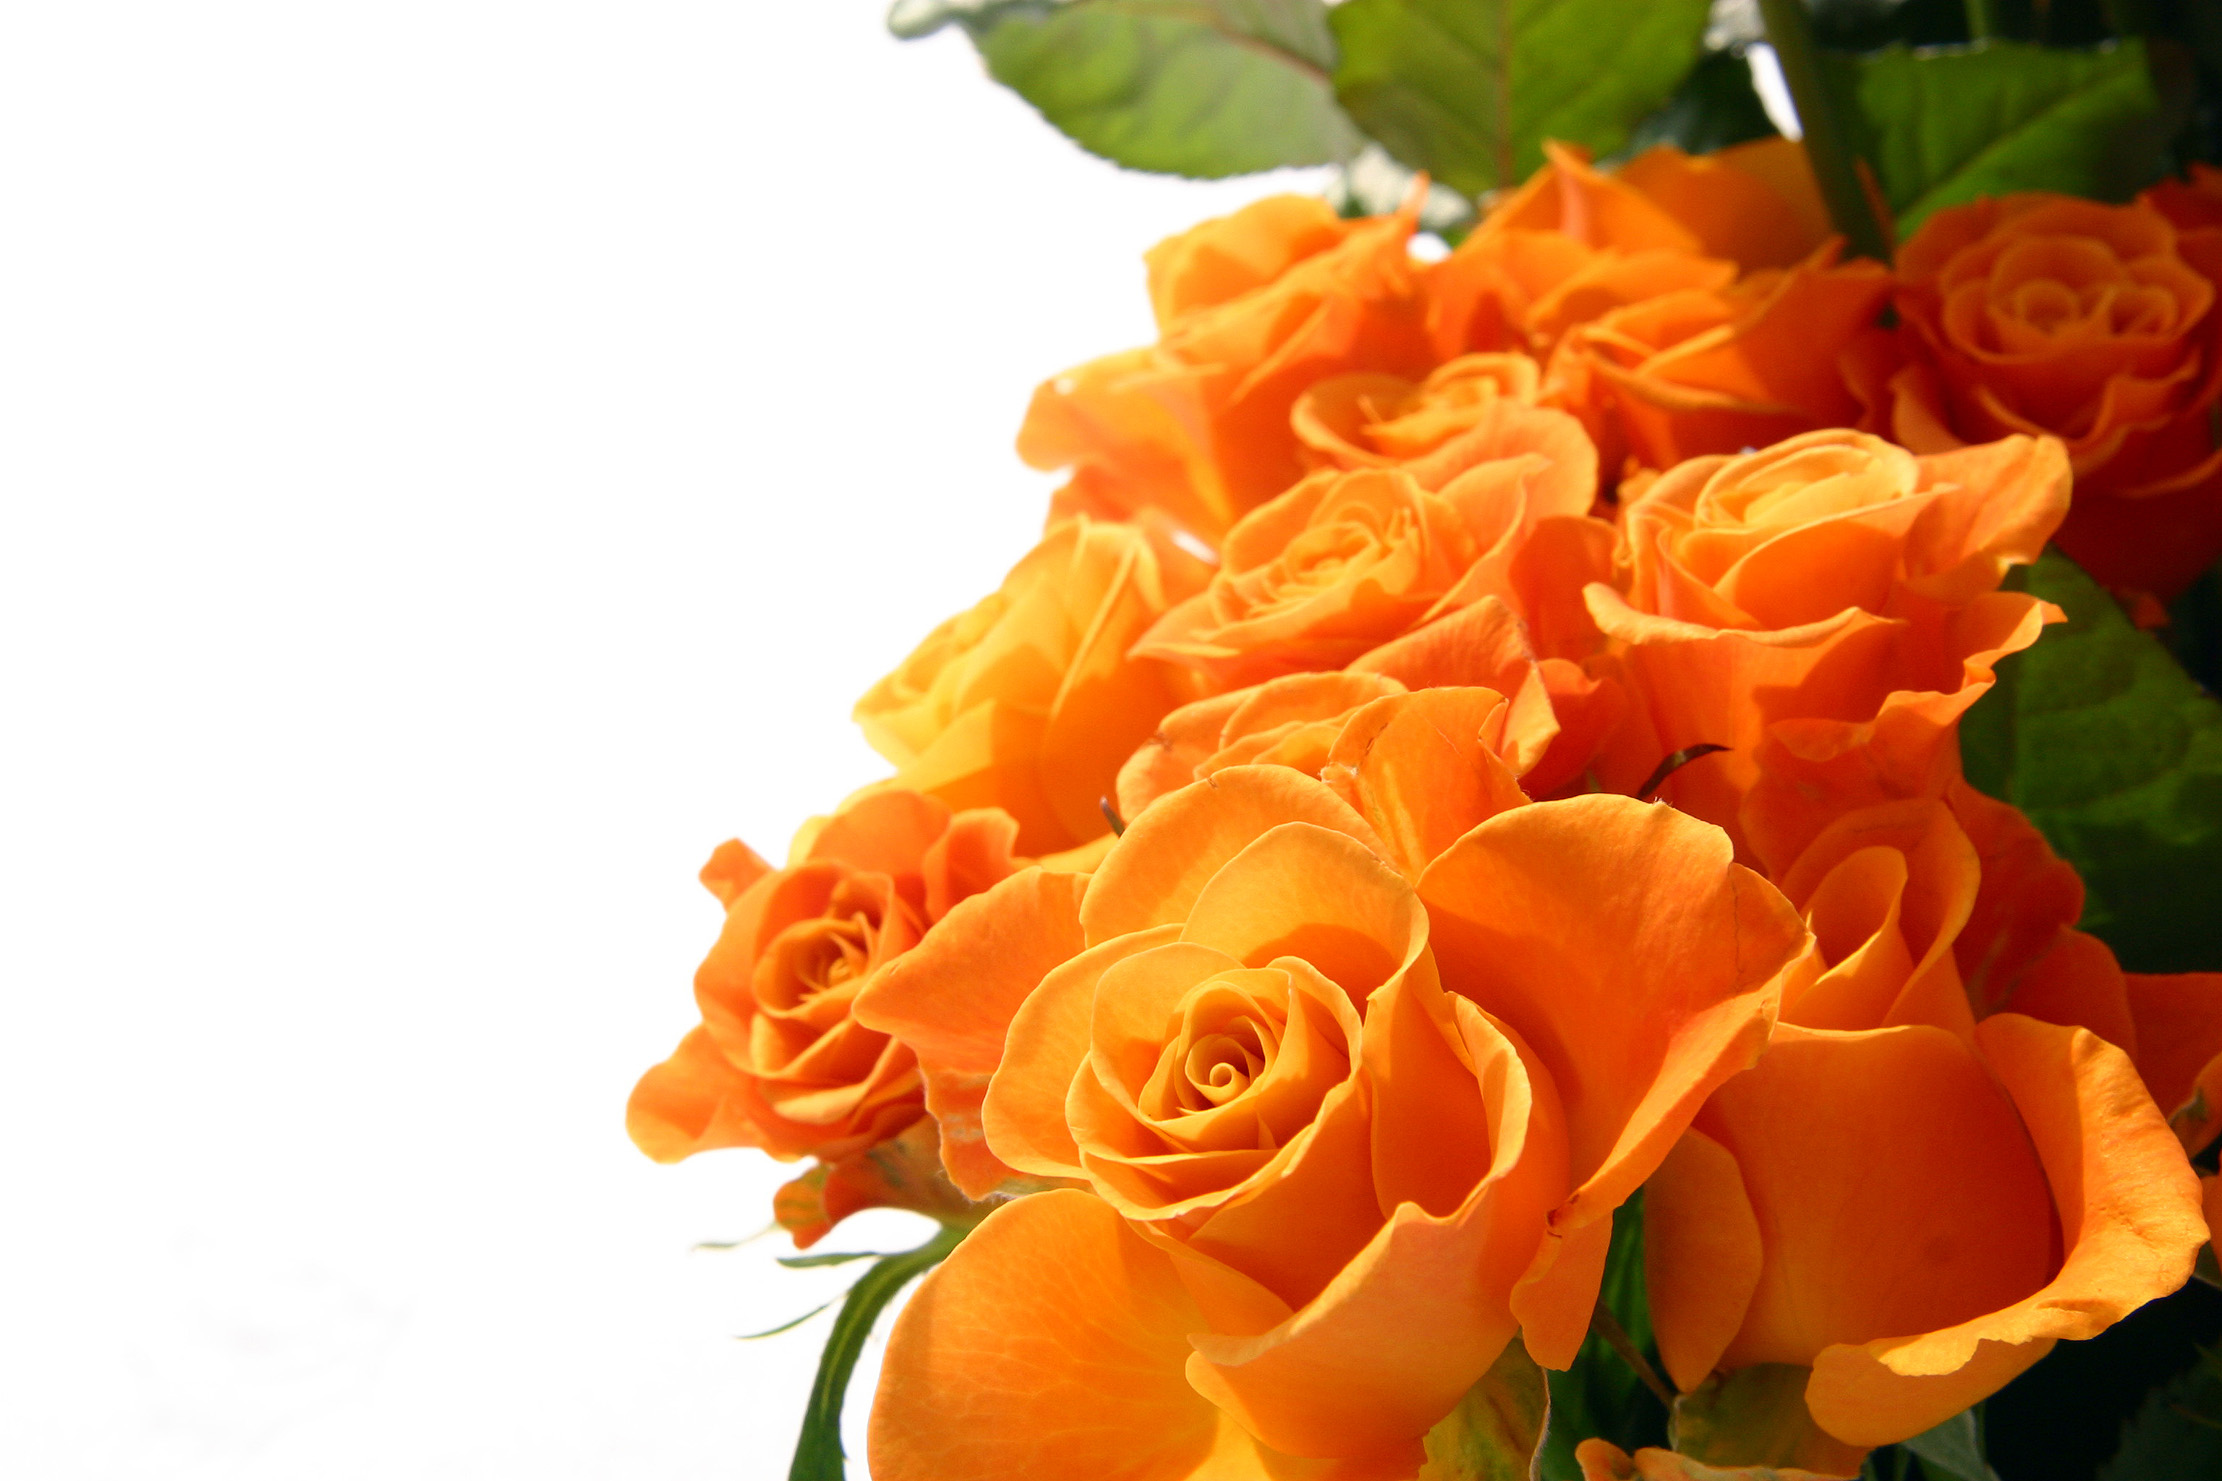 Free Download Rose Orange Flowers Wallpaper Png Transparent Best Stock Photos 2222x1481 For Your Desktop Mobile Tablet Explore 31 Orange Flowers Wallpapers Orange Flowers Wallpapers Orange Wallpapers Background Orange,Smoked Ham Rump Portion